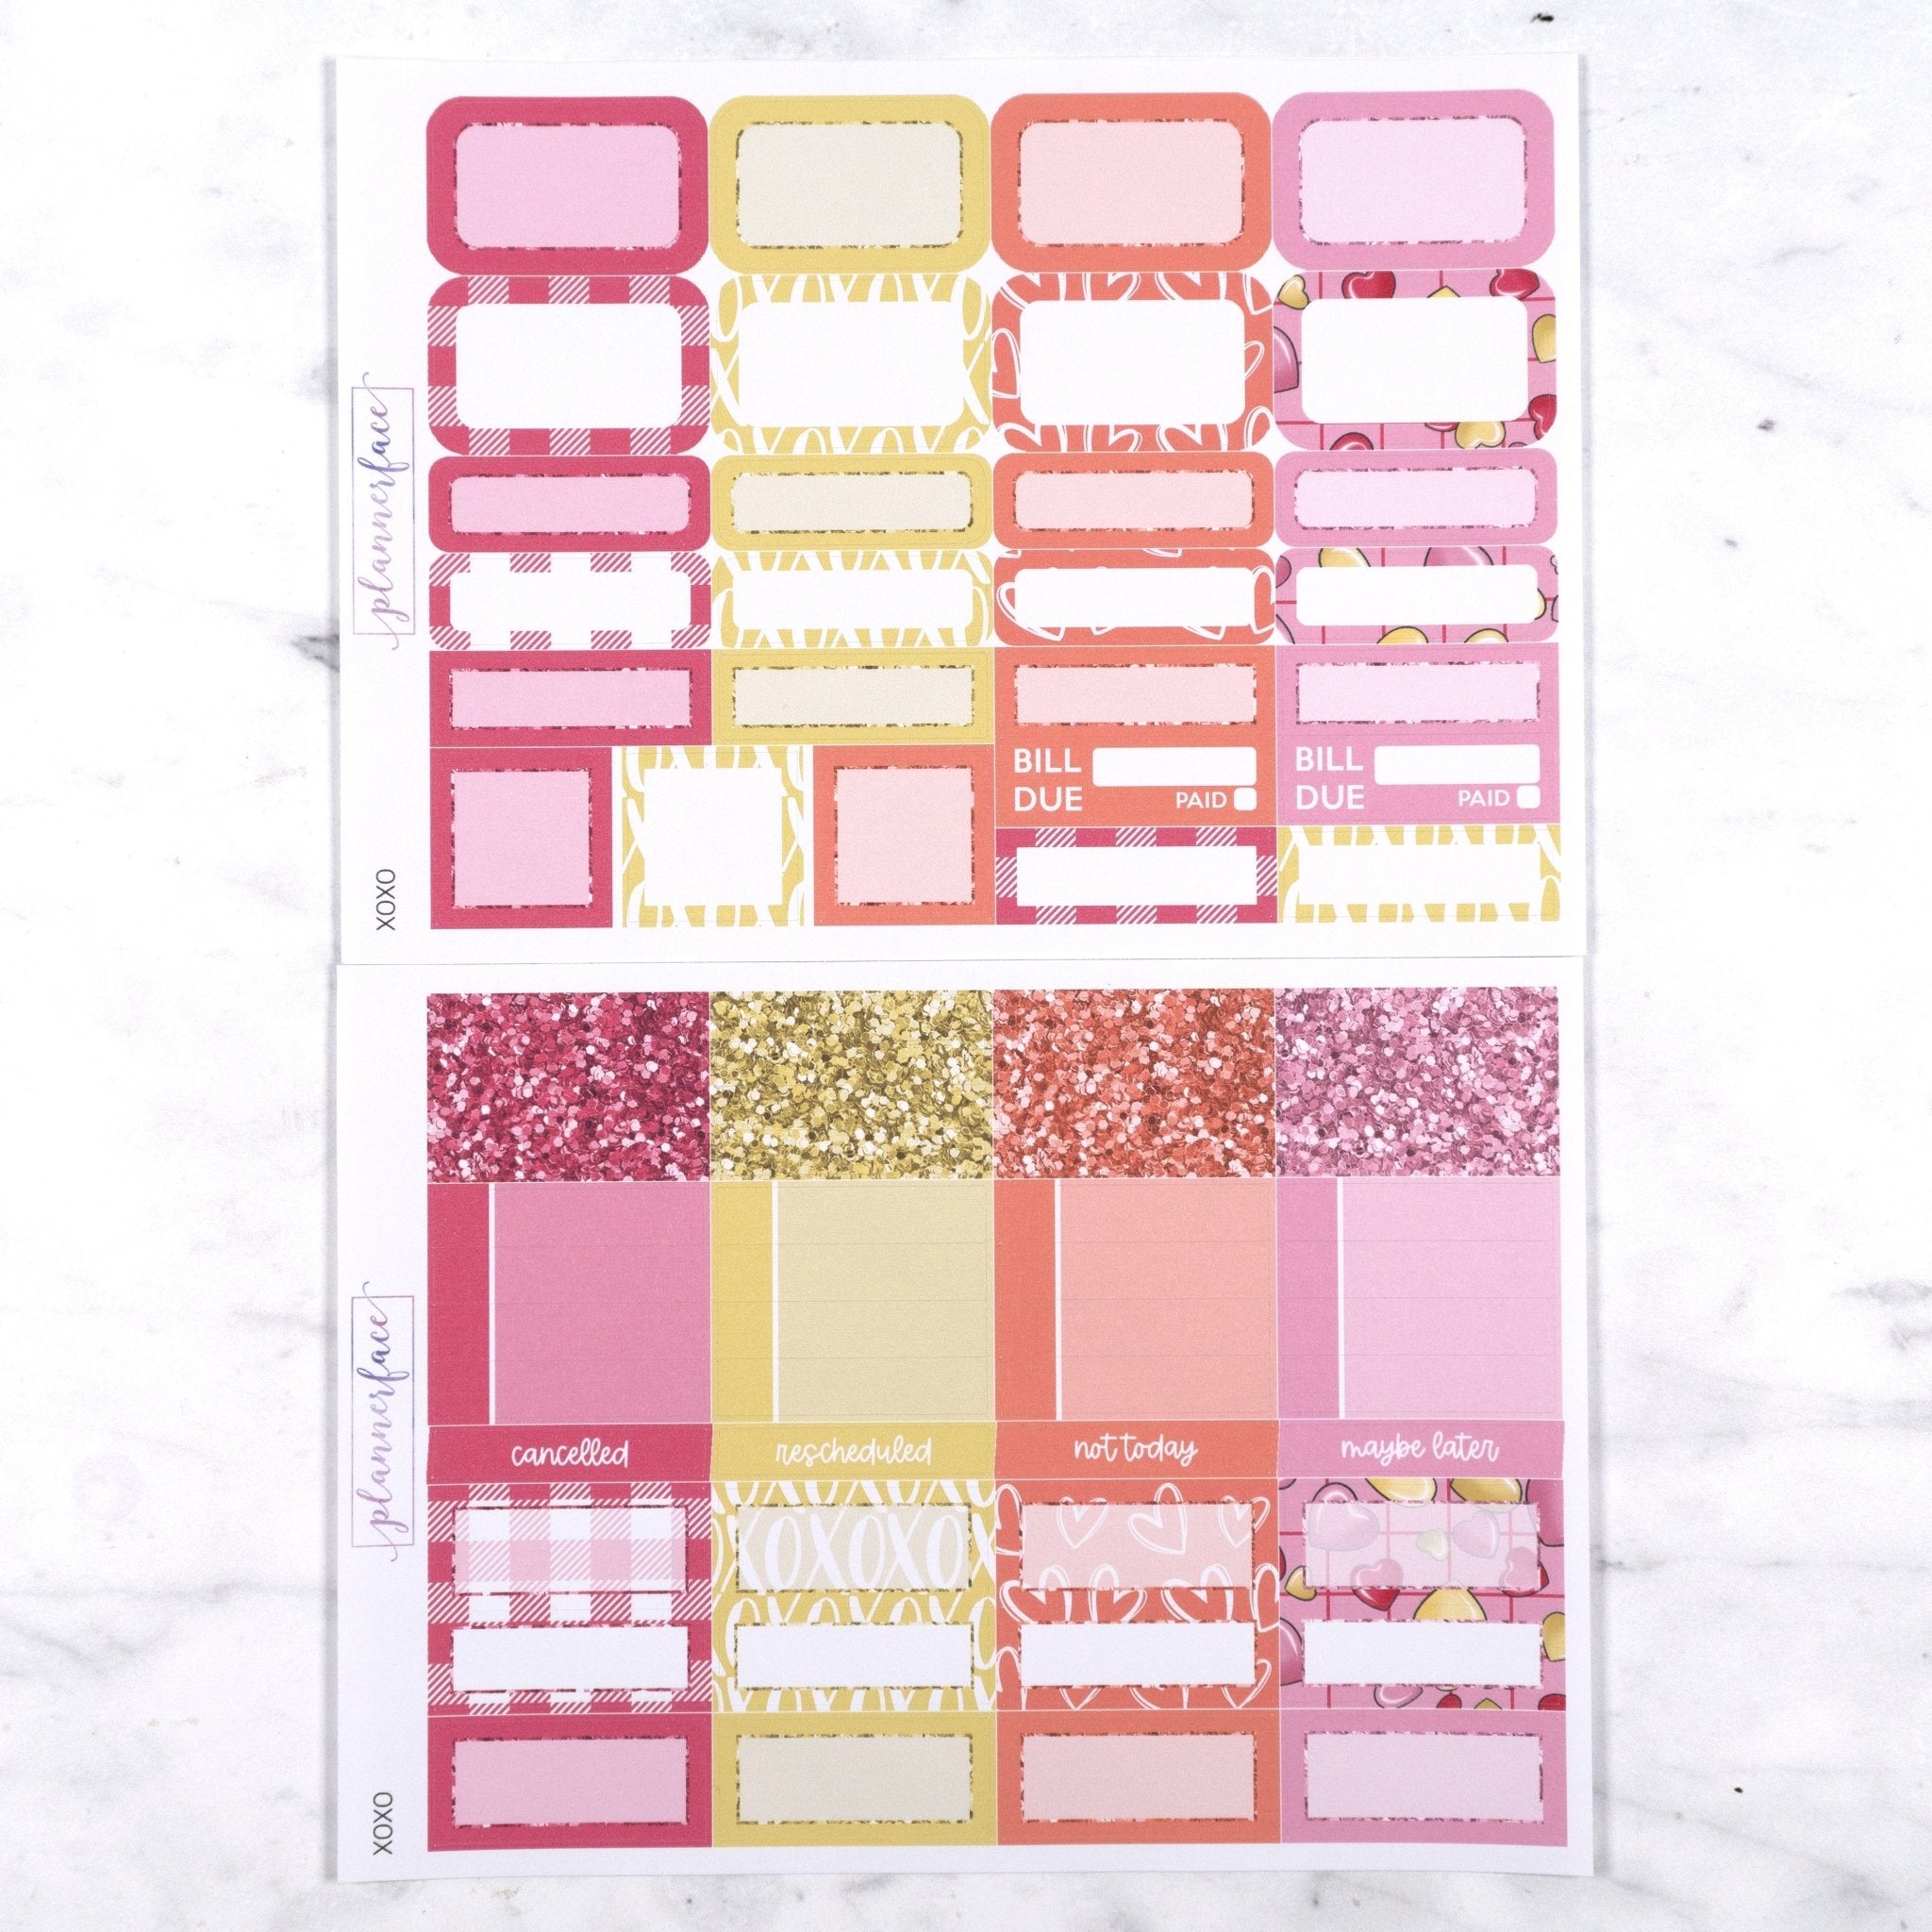 XOXO Weekly Kit by Plannerface